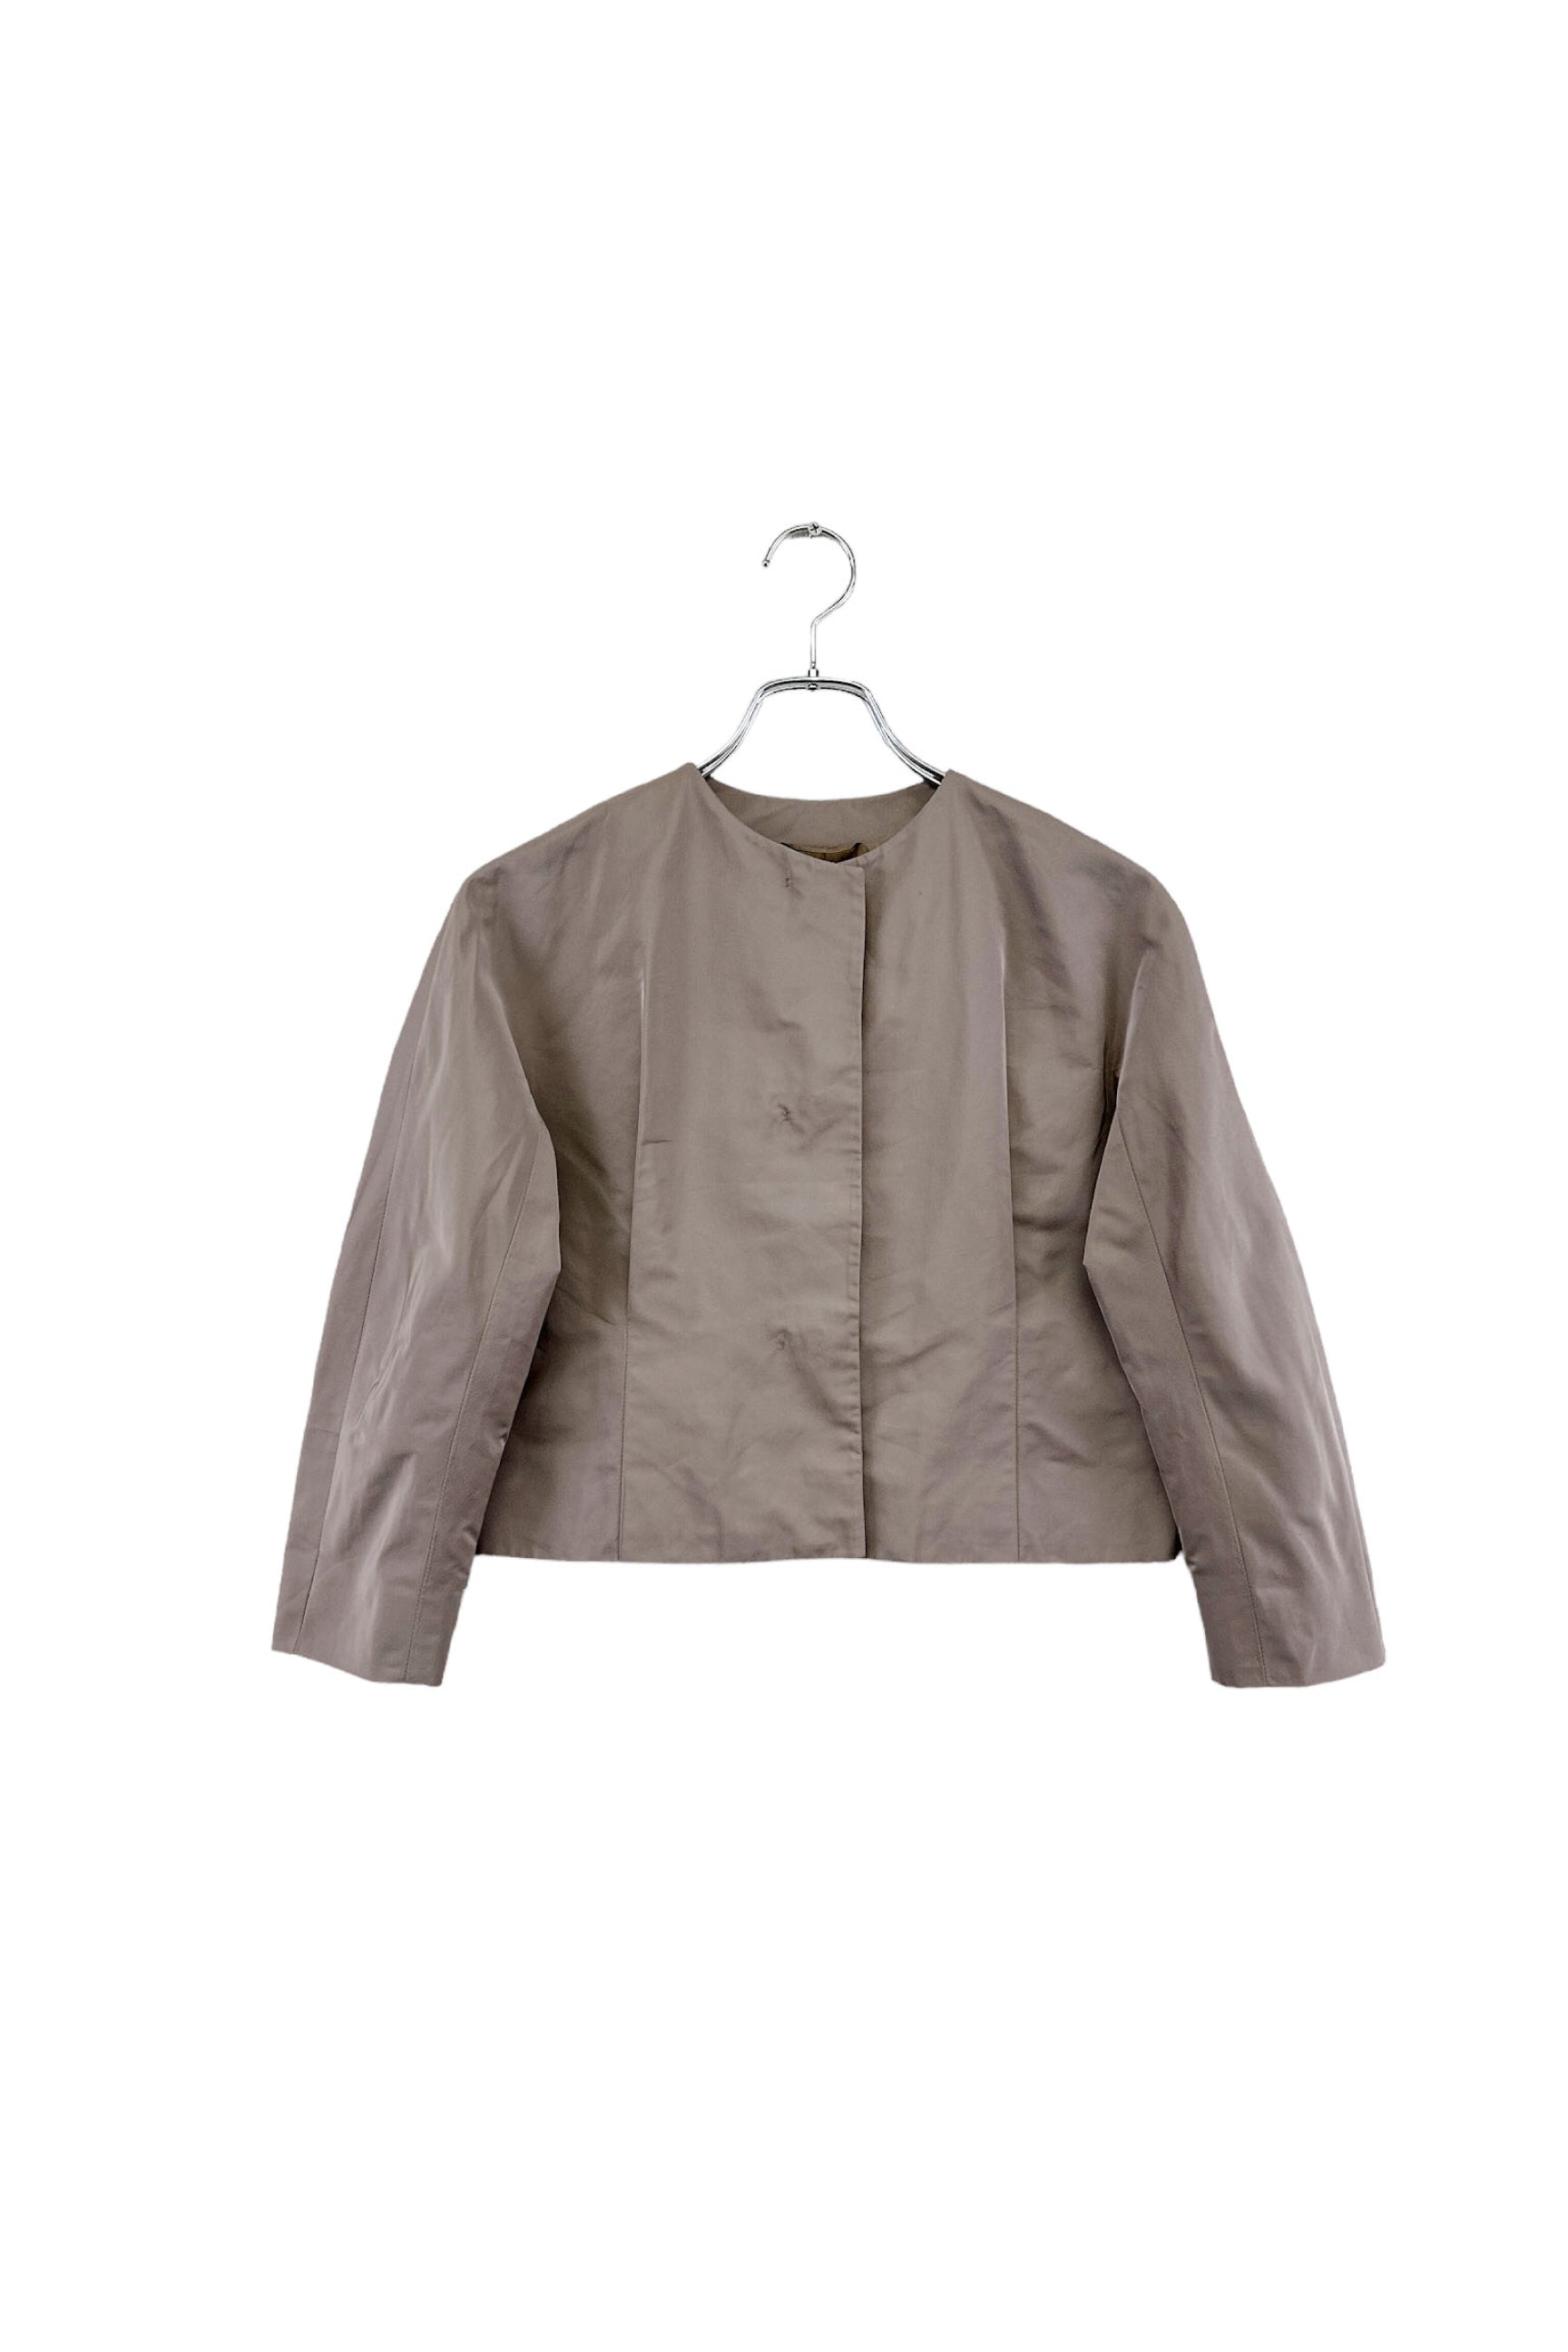 Made in ITALY JIL SANDER jacket – ReSCOUNT STORE